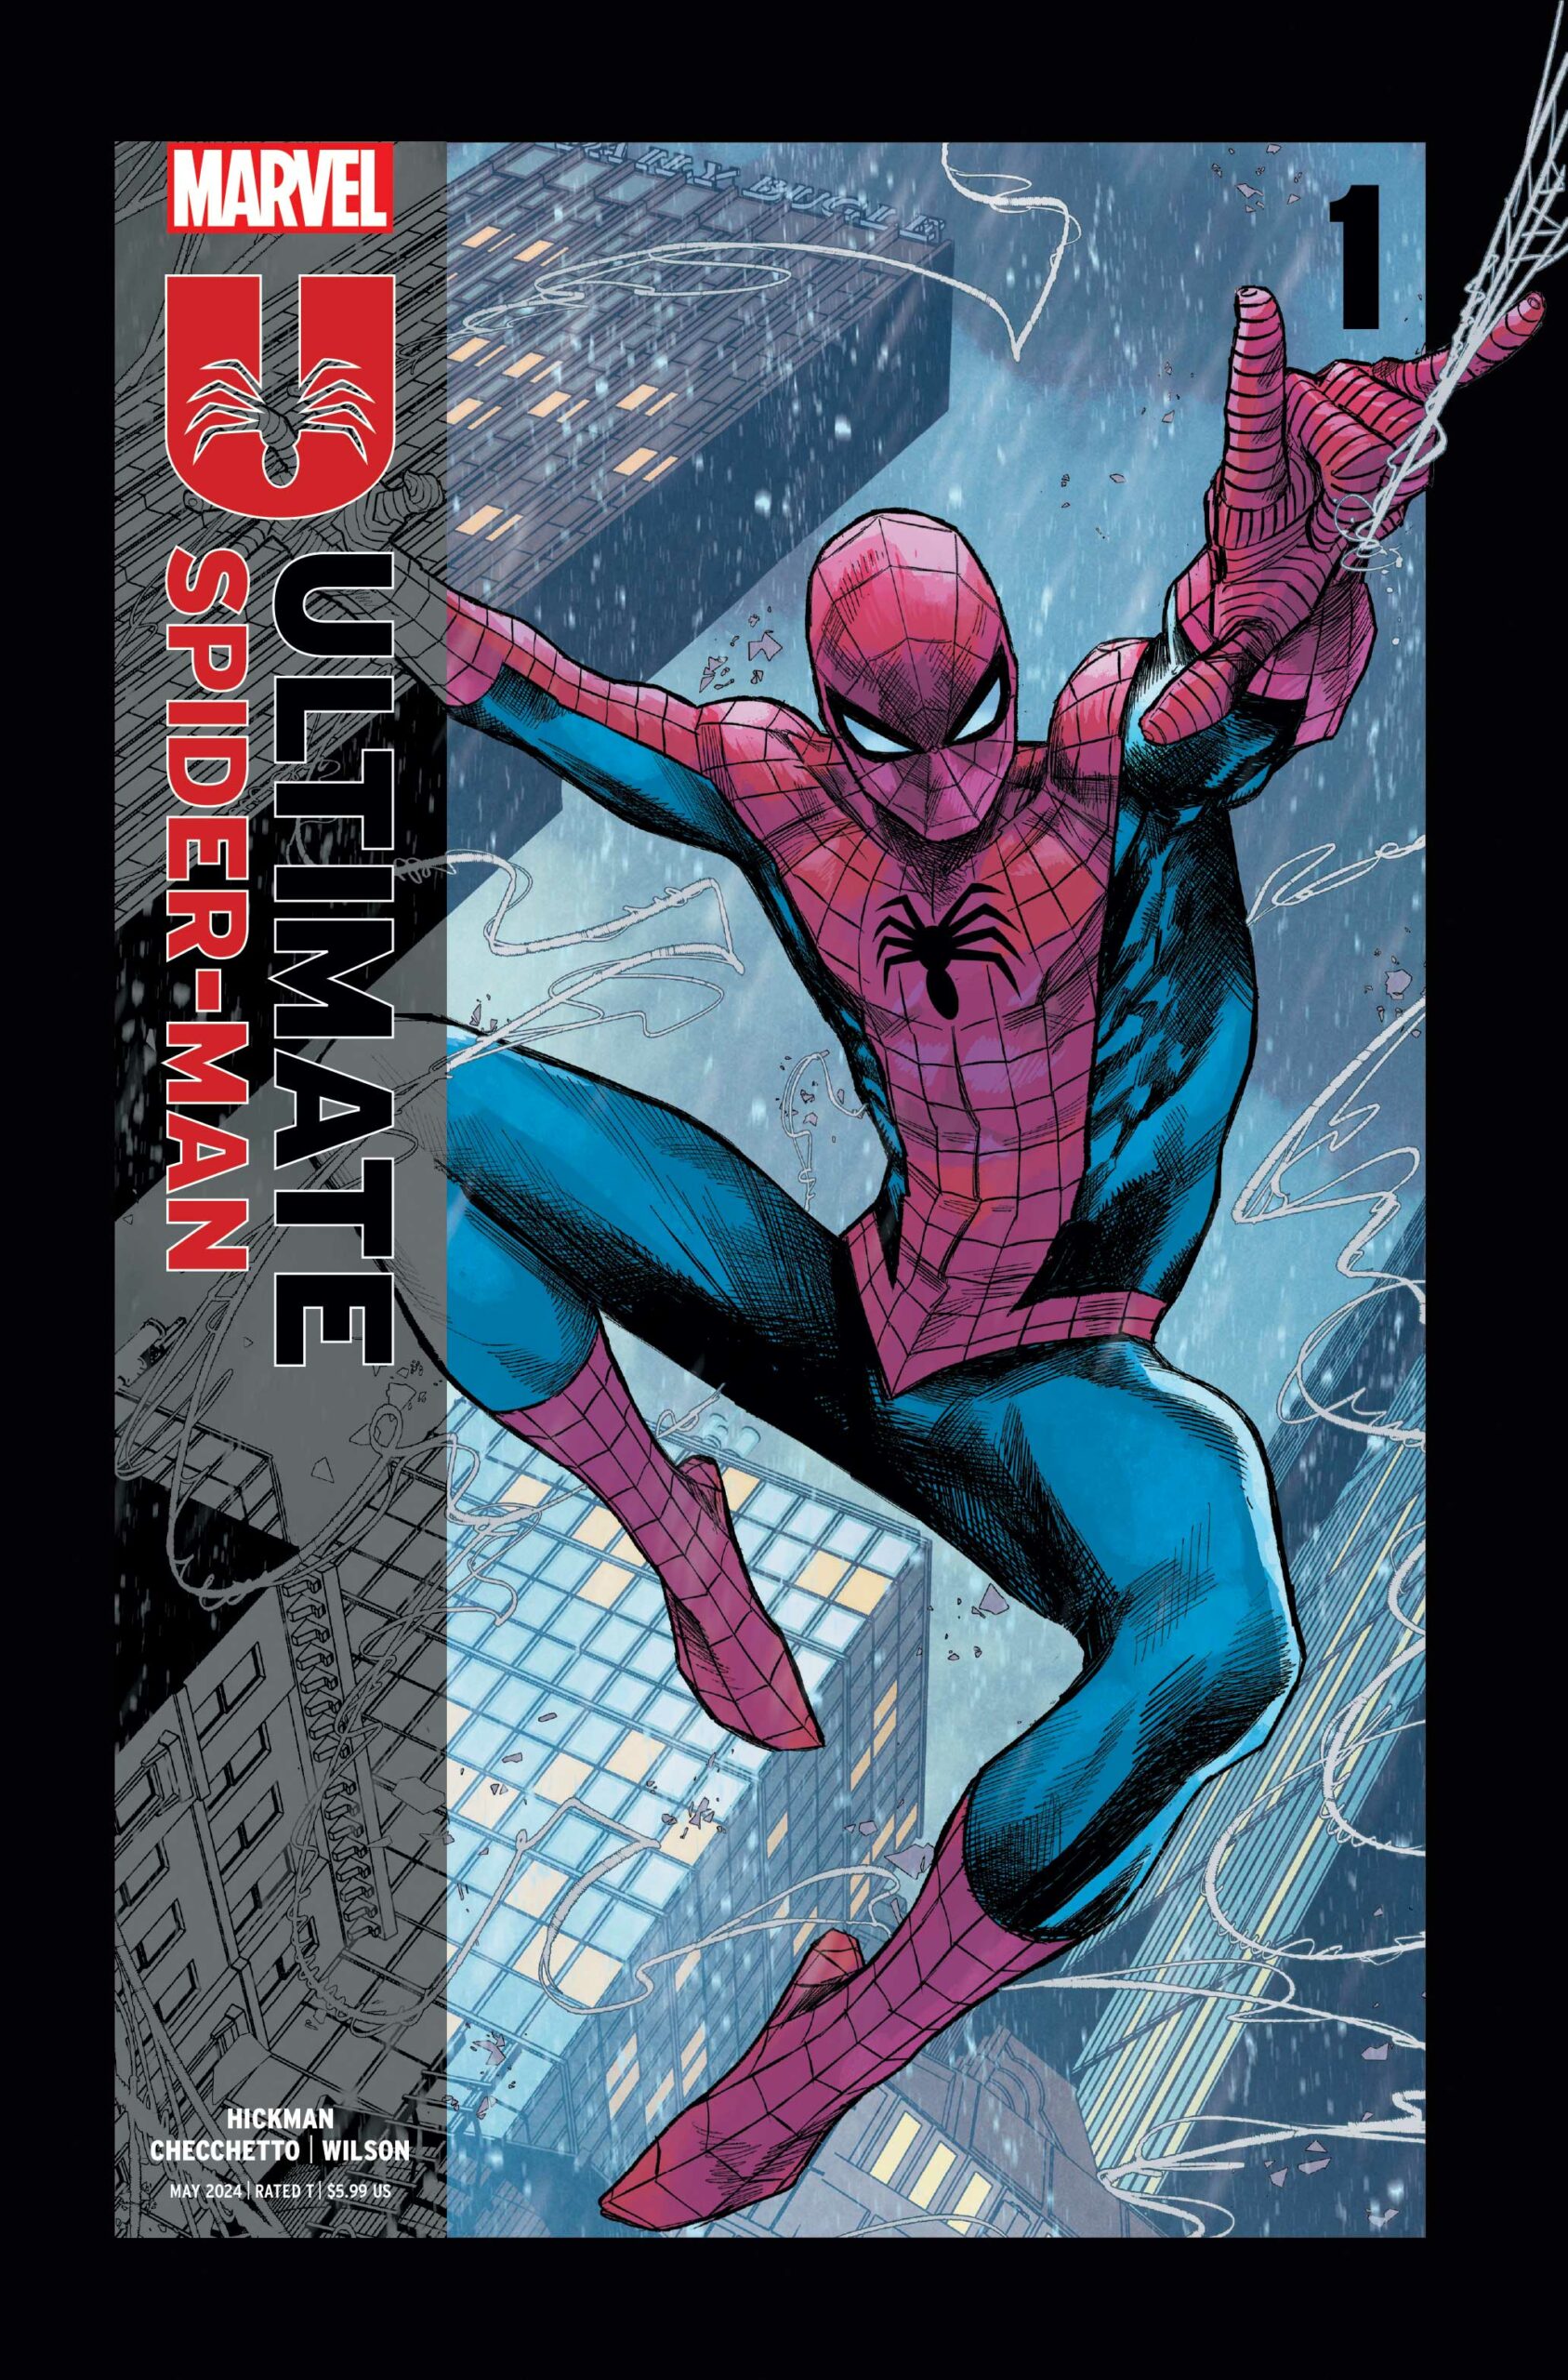 Marvel's 'Ultimate Spider-Man' #1 Continues To Sell Out, 5th 